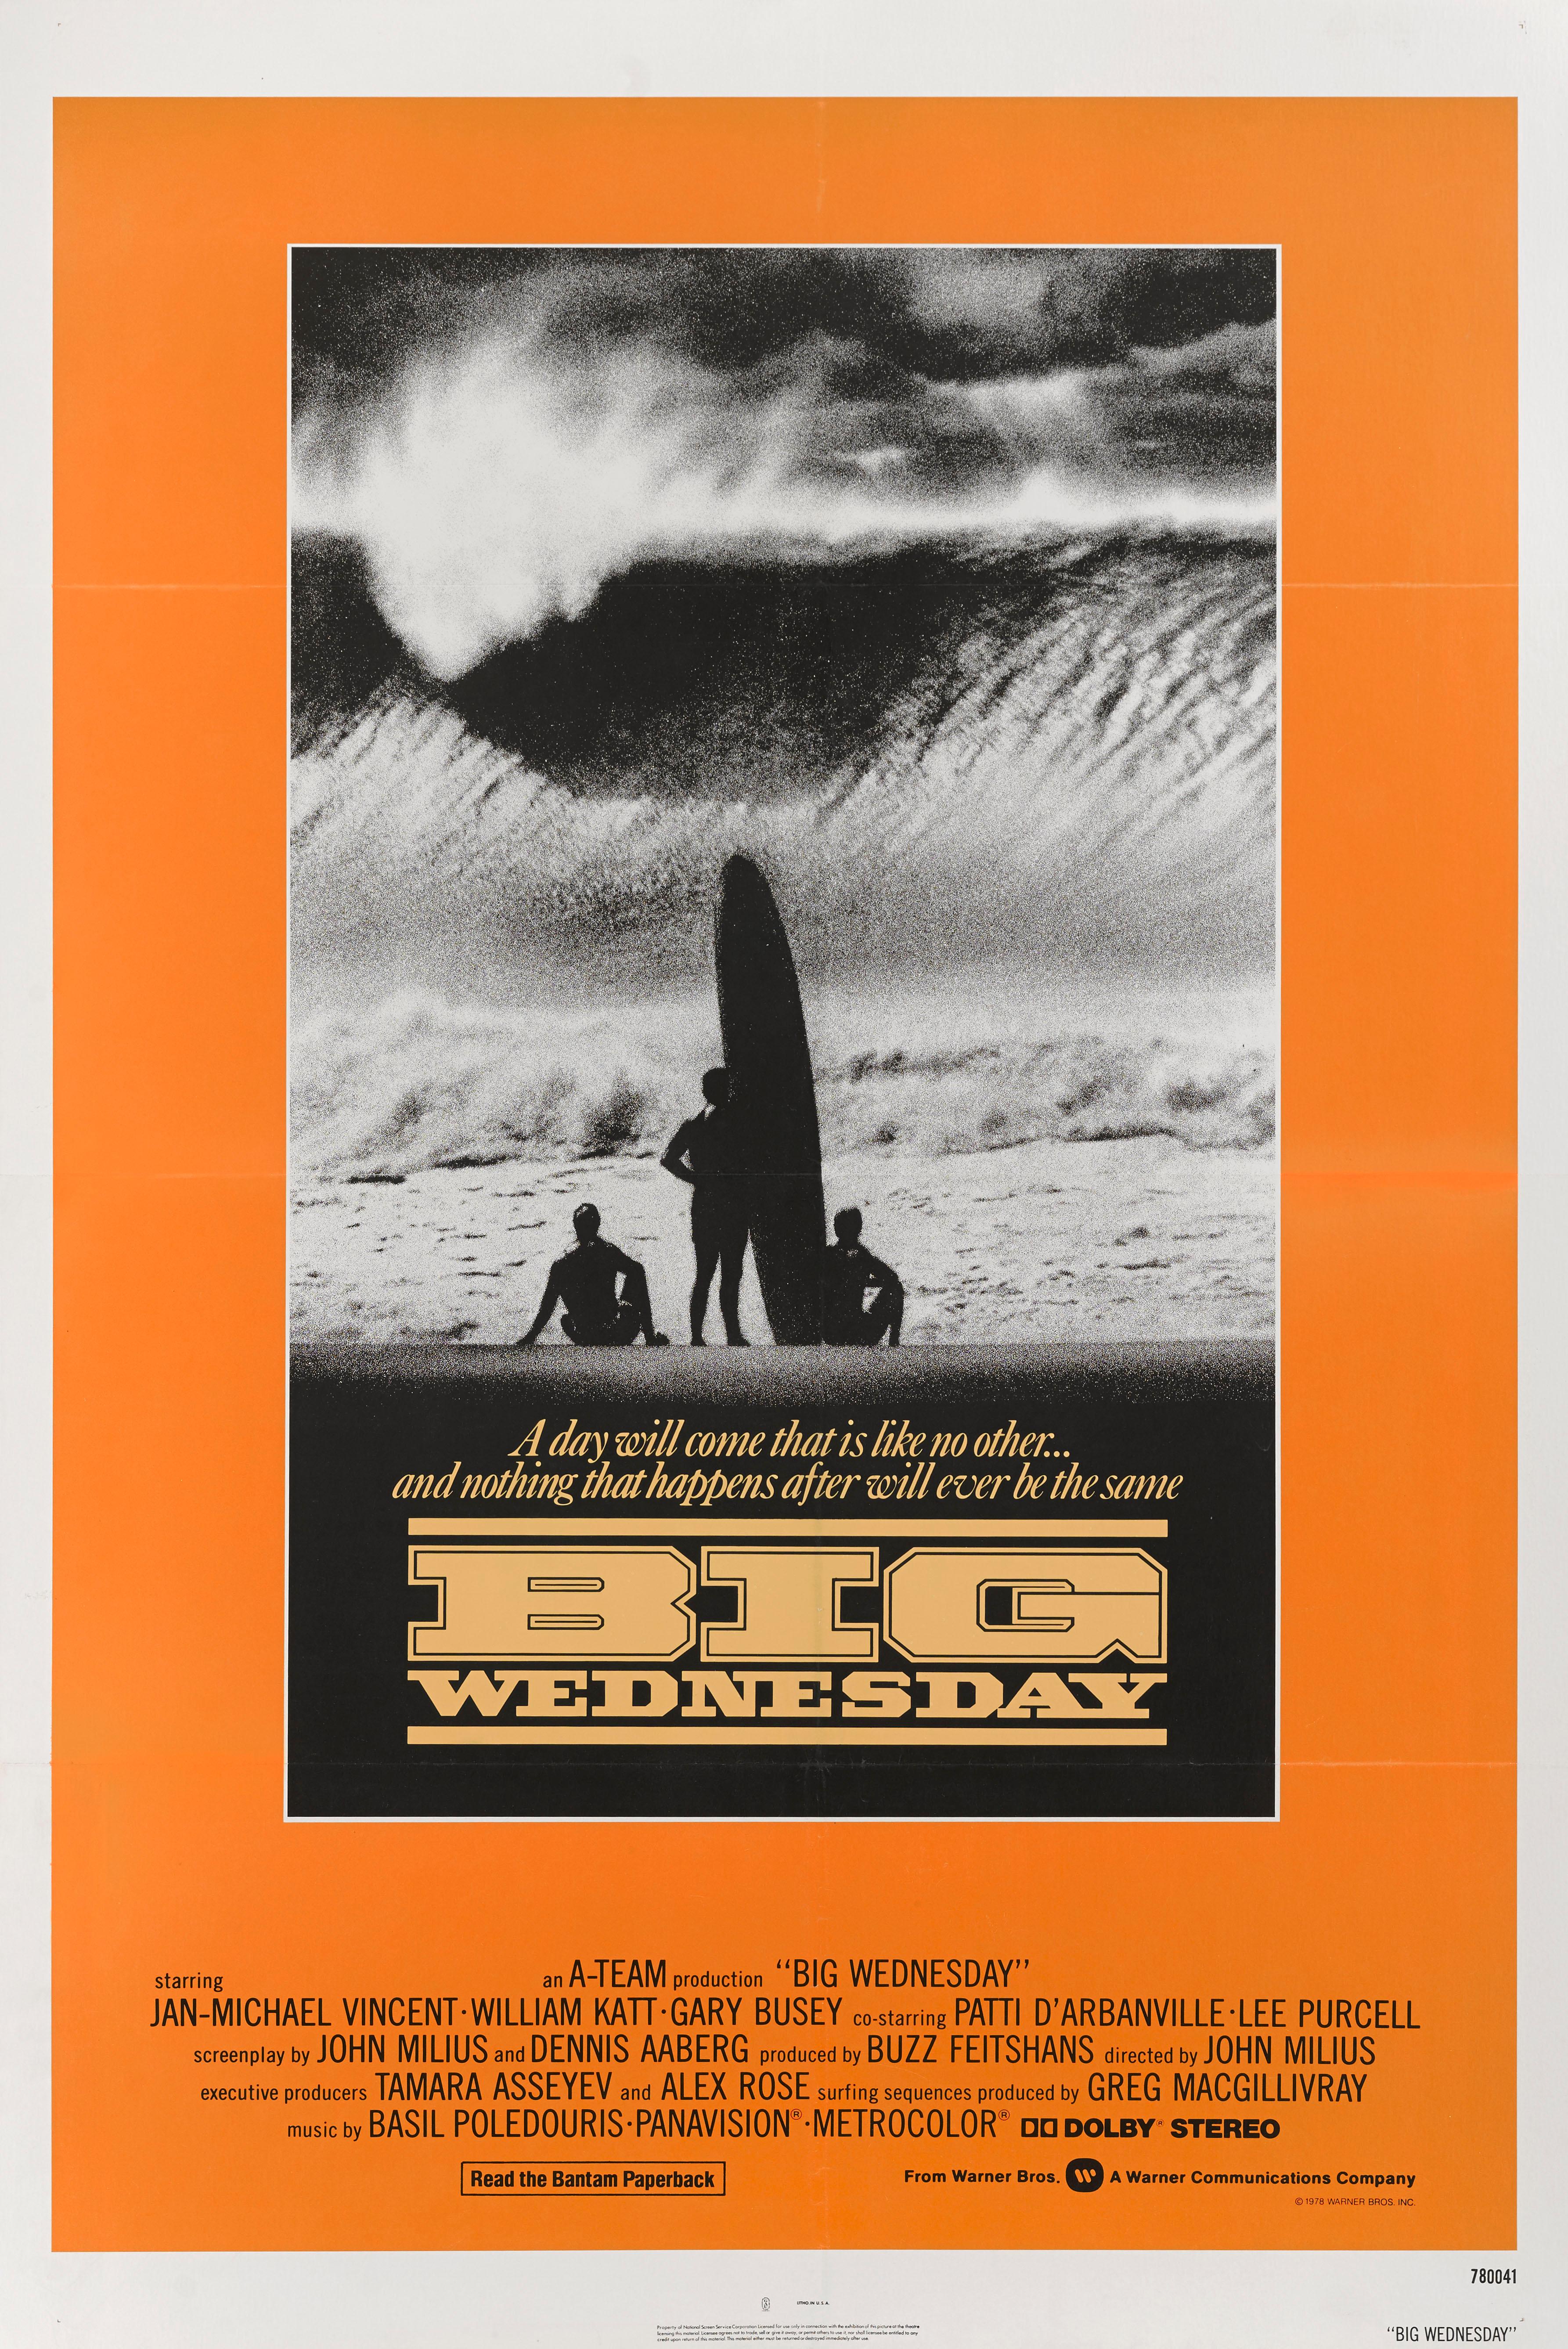 Original US film poster for the cult 1978 surfing movie staring Jan-Michael Vincent, William Katt and directed by John Milius.
This poster is conservation linen backed and it would be shipped rolled in a strong tube. If outside the UK it will be